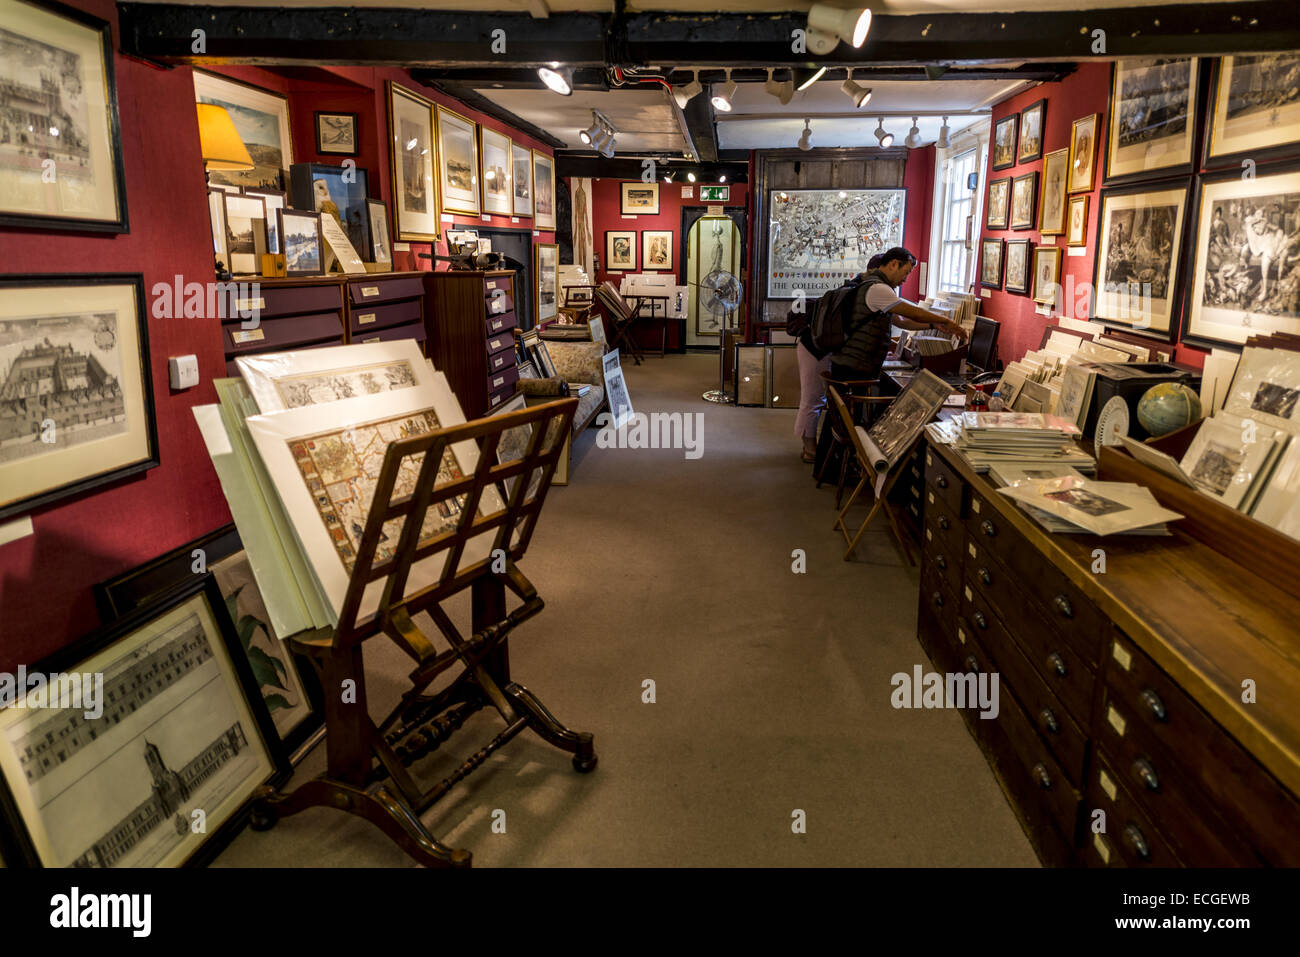 Sanders of Oxford is an Antique Print and Maps shop on the High Street of Oxford, UK Stock Photo Alamy